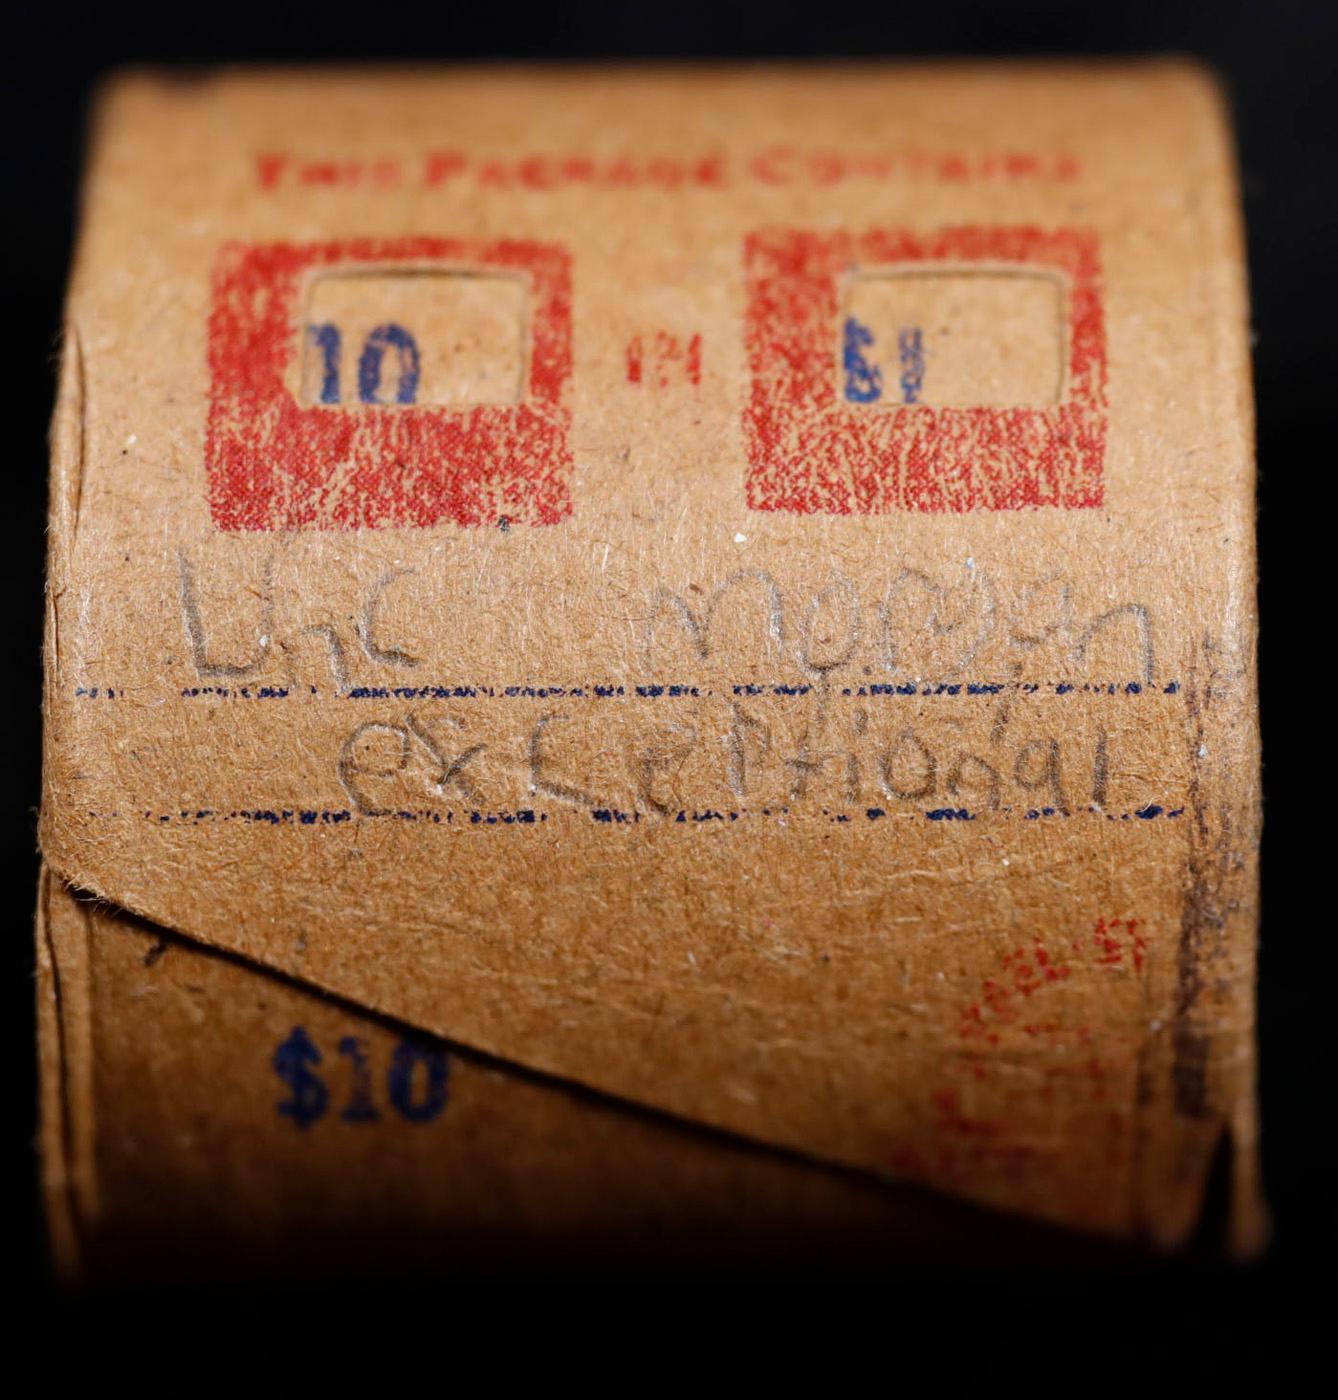 *Uncovered Hoard* - Covered End Roll - Marked "Unc Morgan Exceptional" - Weight shows x10 Coins (FC)